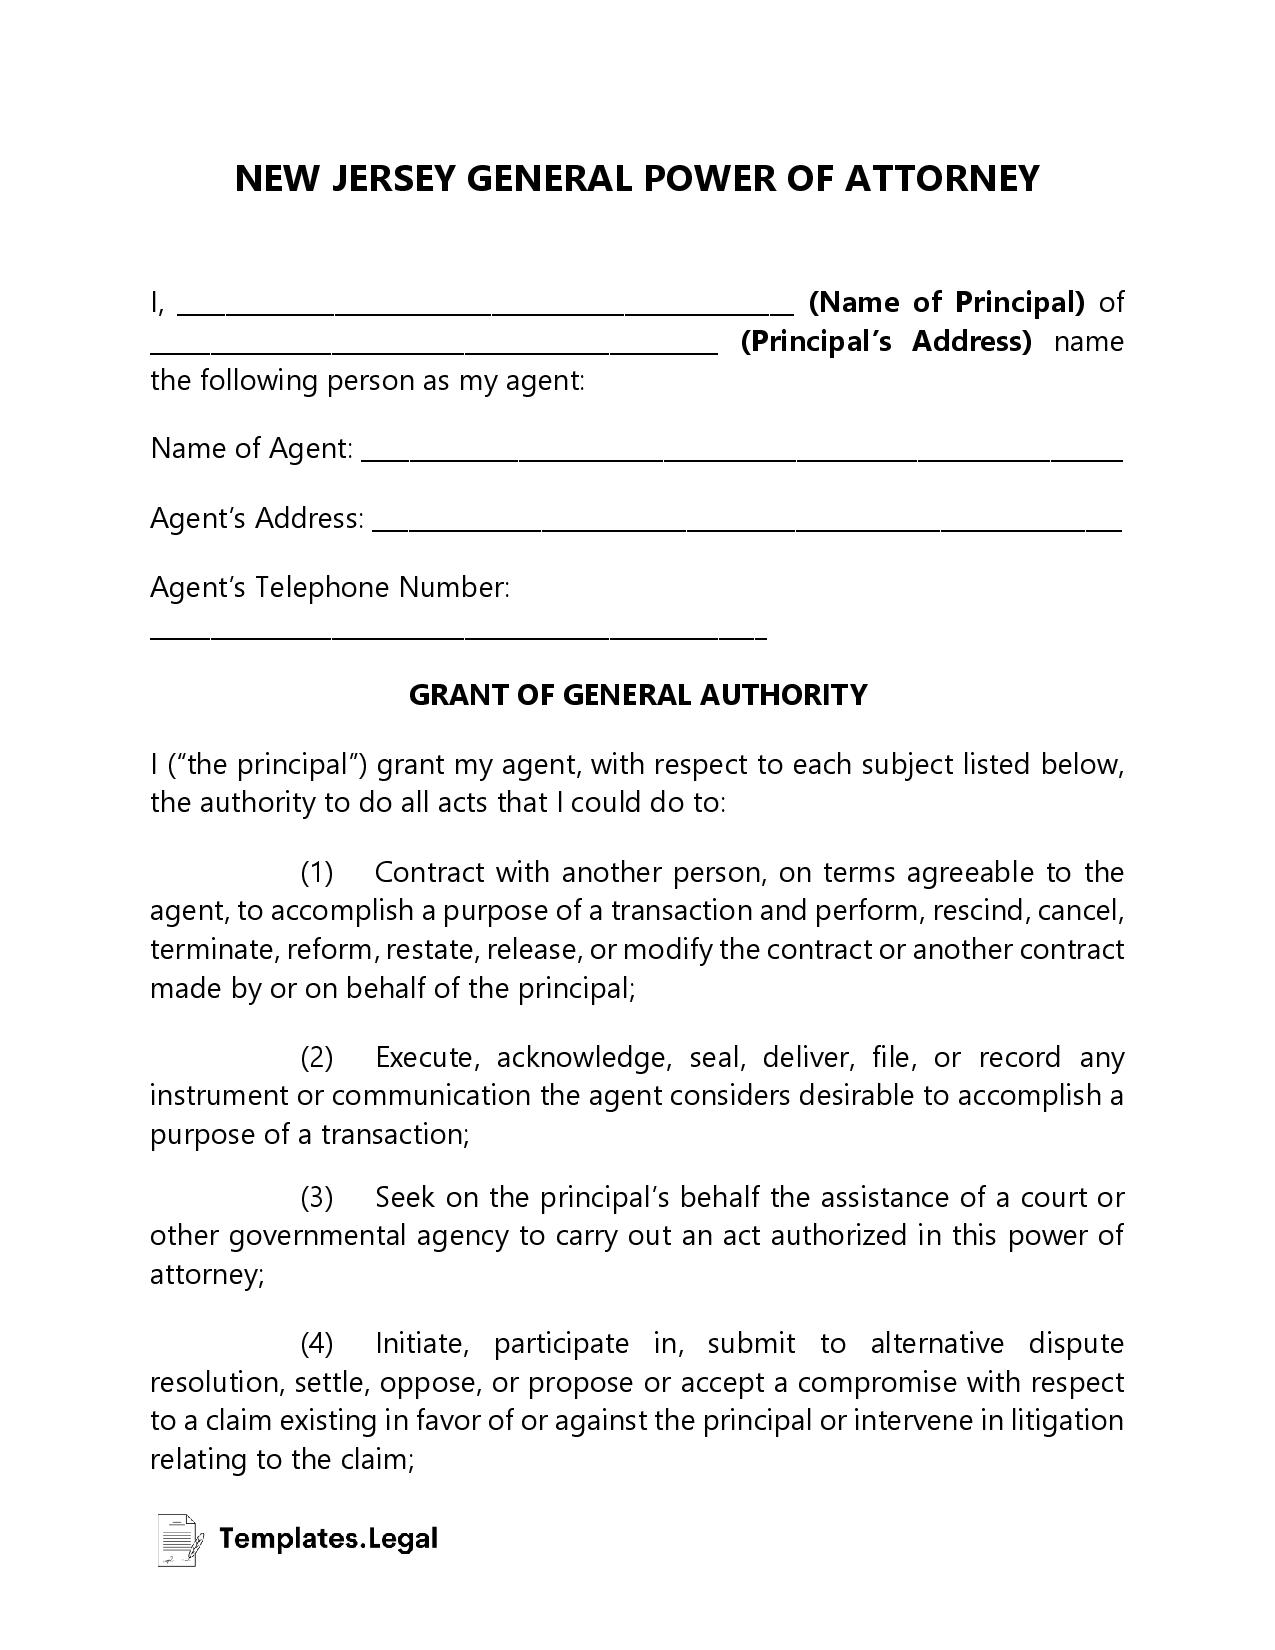 New Jersey General Power of Attorney - Templates.Legal